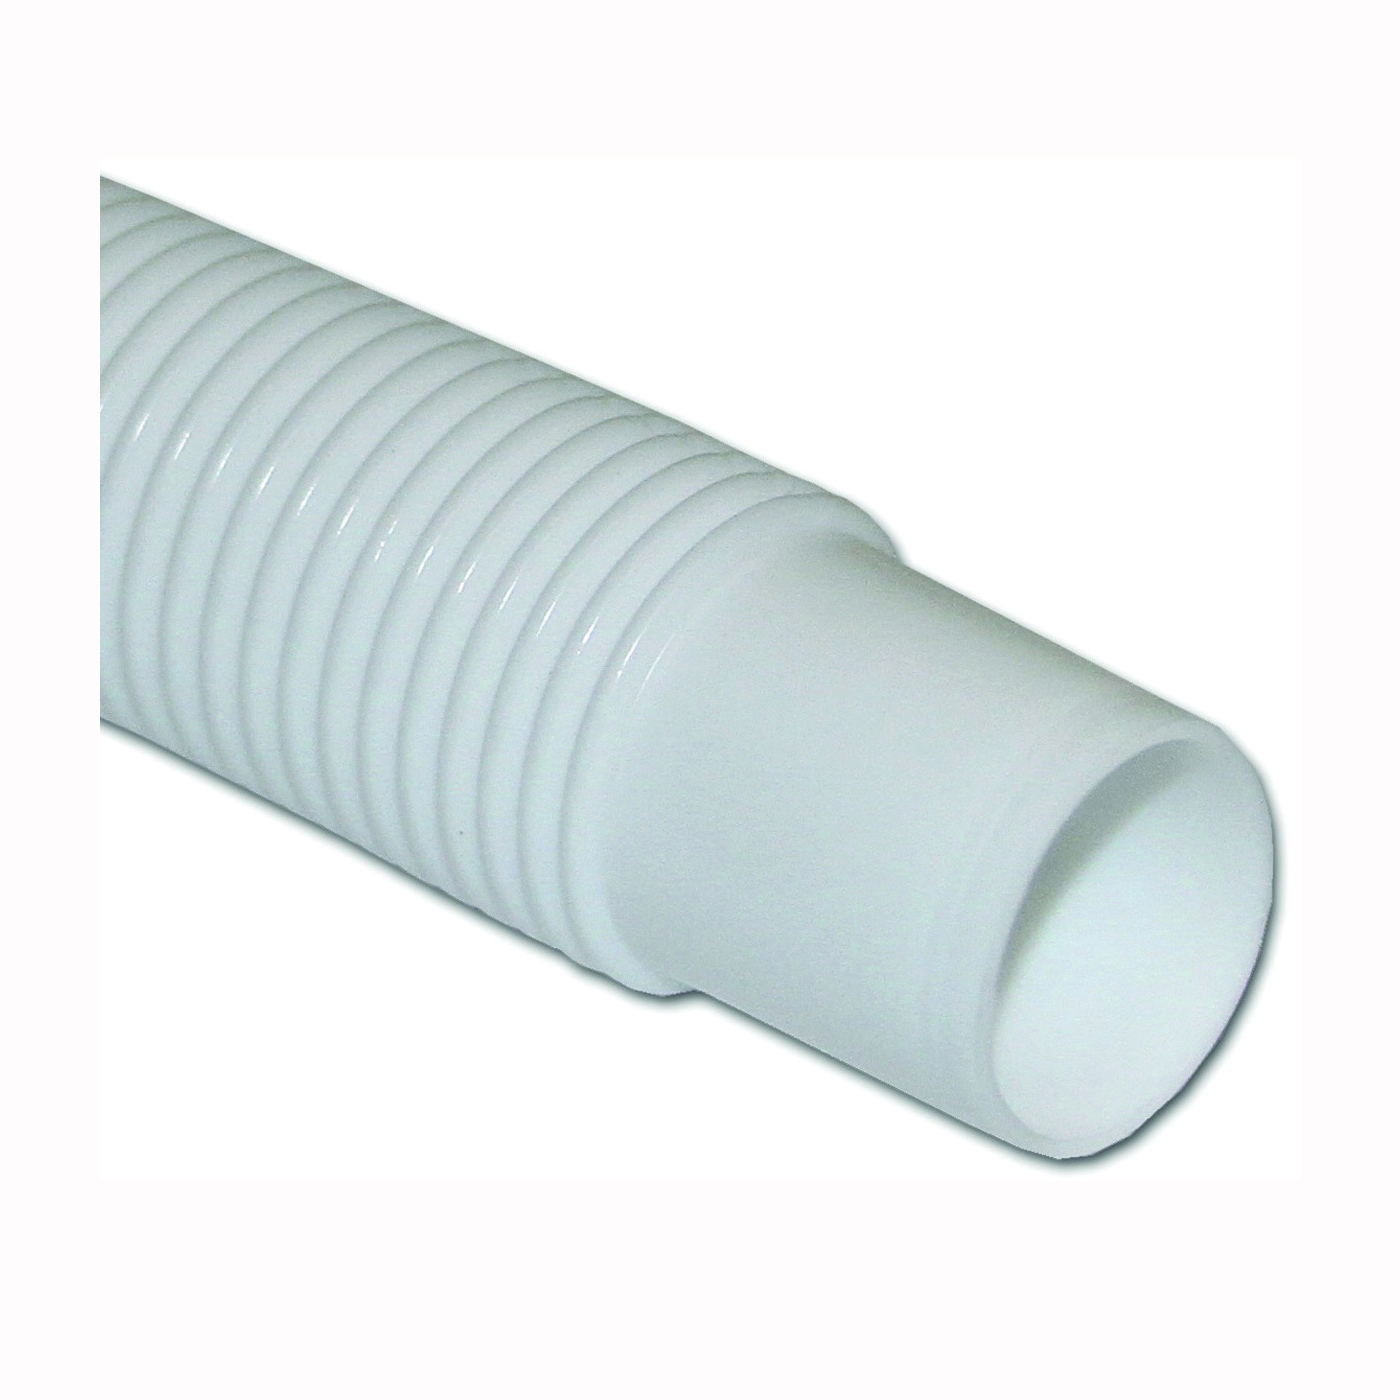 T34 Series T34005004/RBBR Discharge Hose, 1-1/2 in ID, 50 ft L, Polyethylene, Milky White